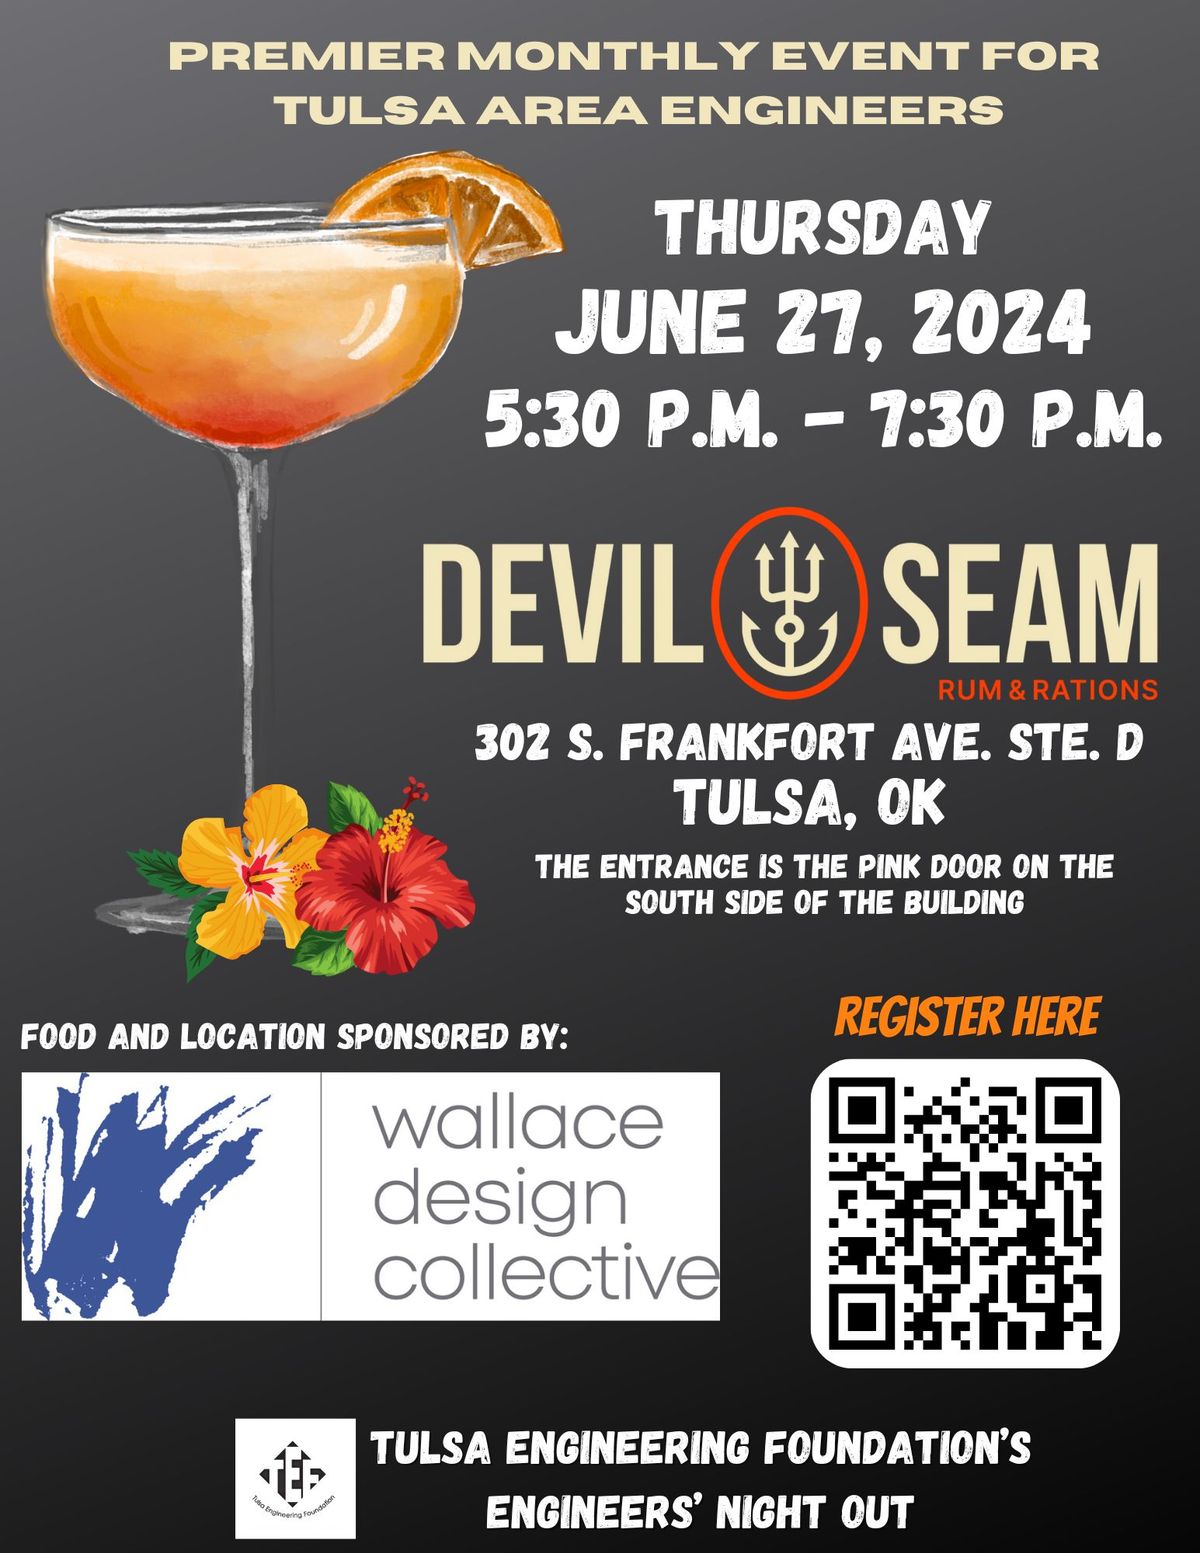 June 27, 2024 - Engineers' Night Out by Wallace Design Collective!